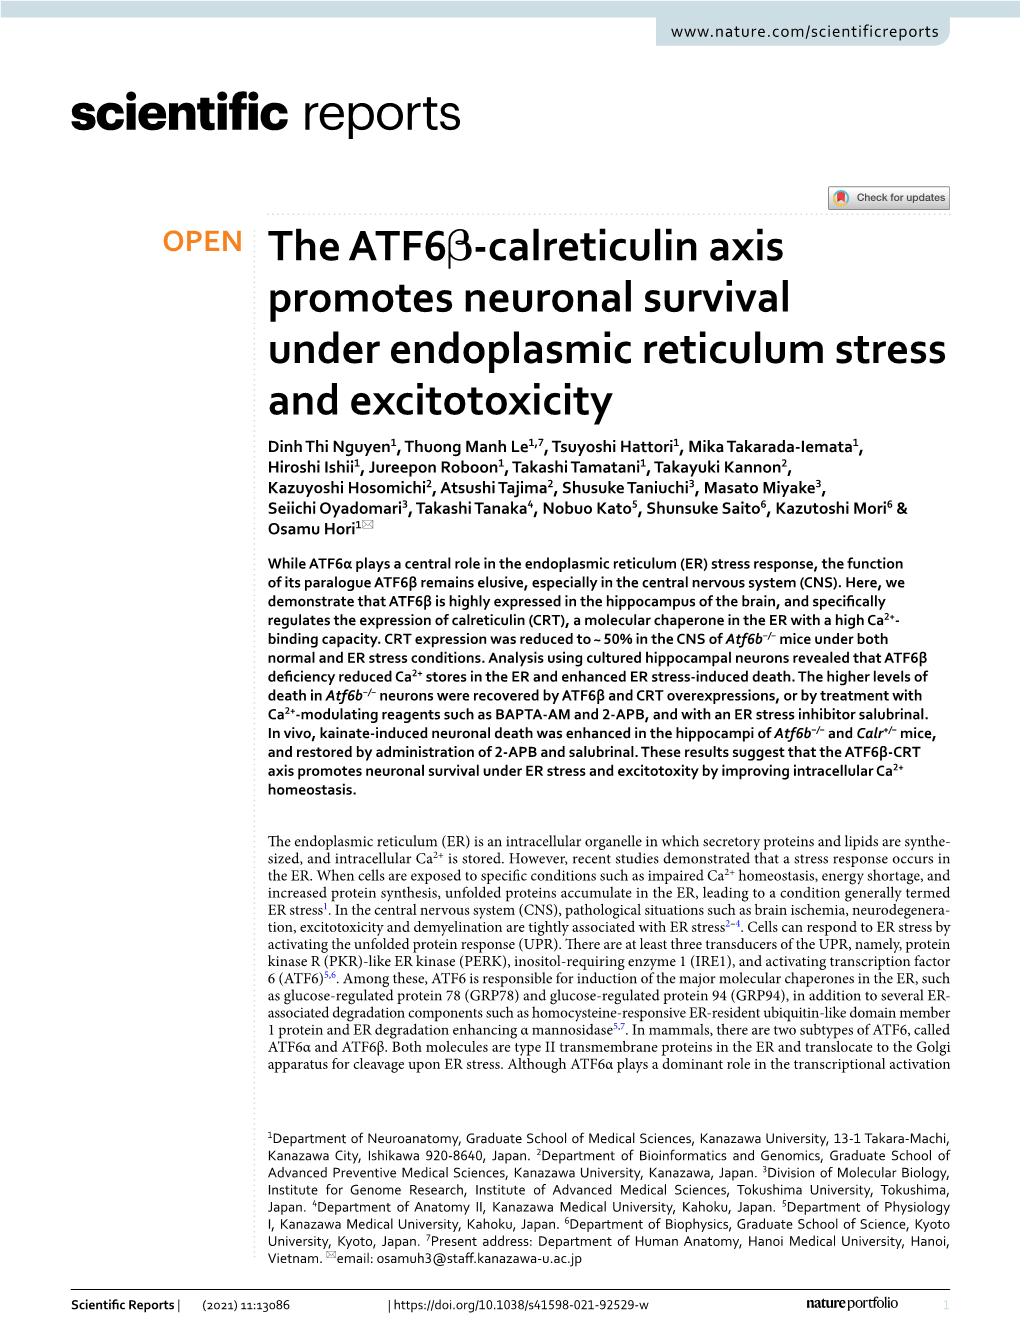 The Atf6β-Calreticulin Axis Promotes Neuronal Survival Under Endoplasmic Reticulum Stress and Excitotoxicity